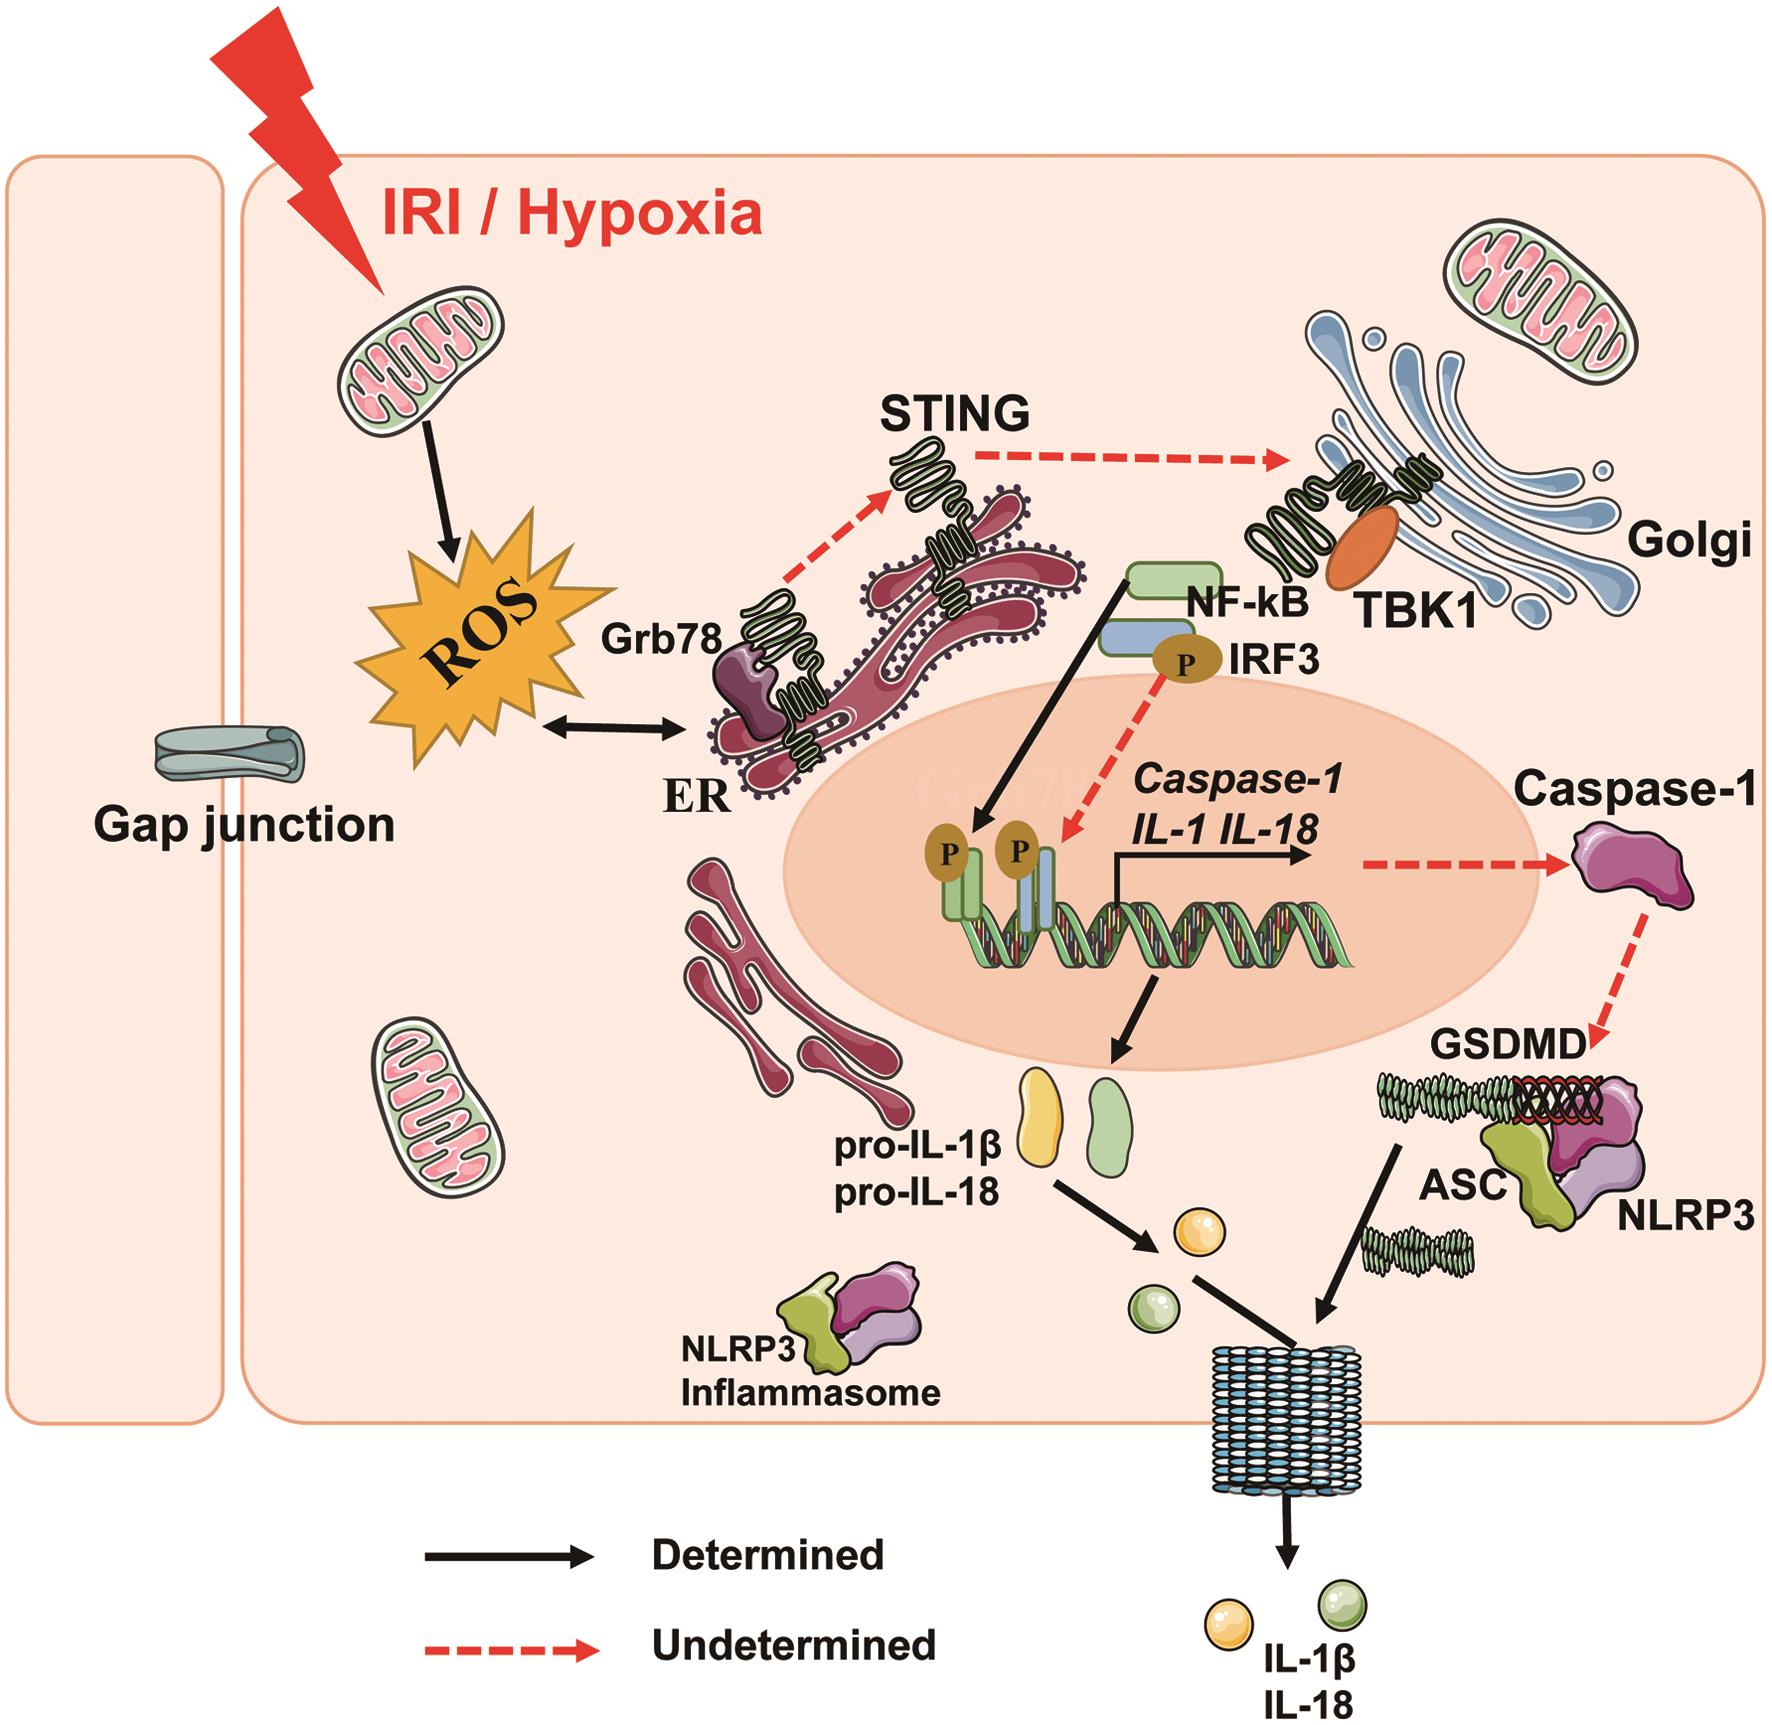 Schematic model of the role of ER stress and STING/IRF3 on pyroptosis in myocardial I/R injury.